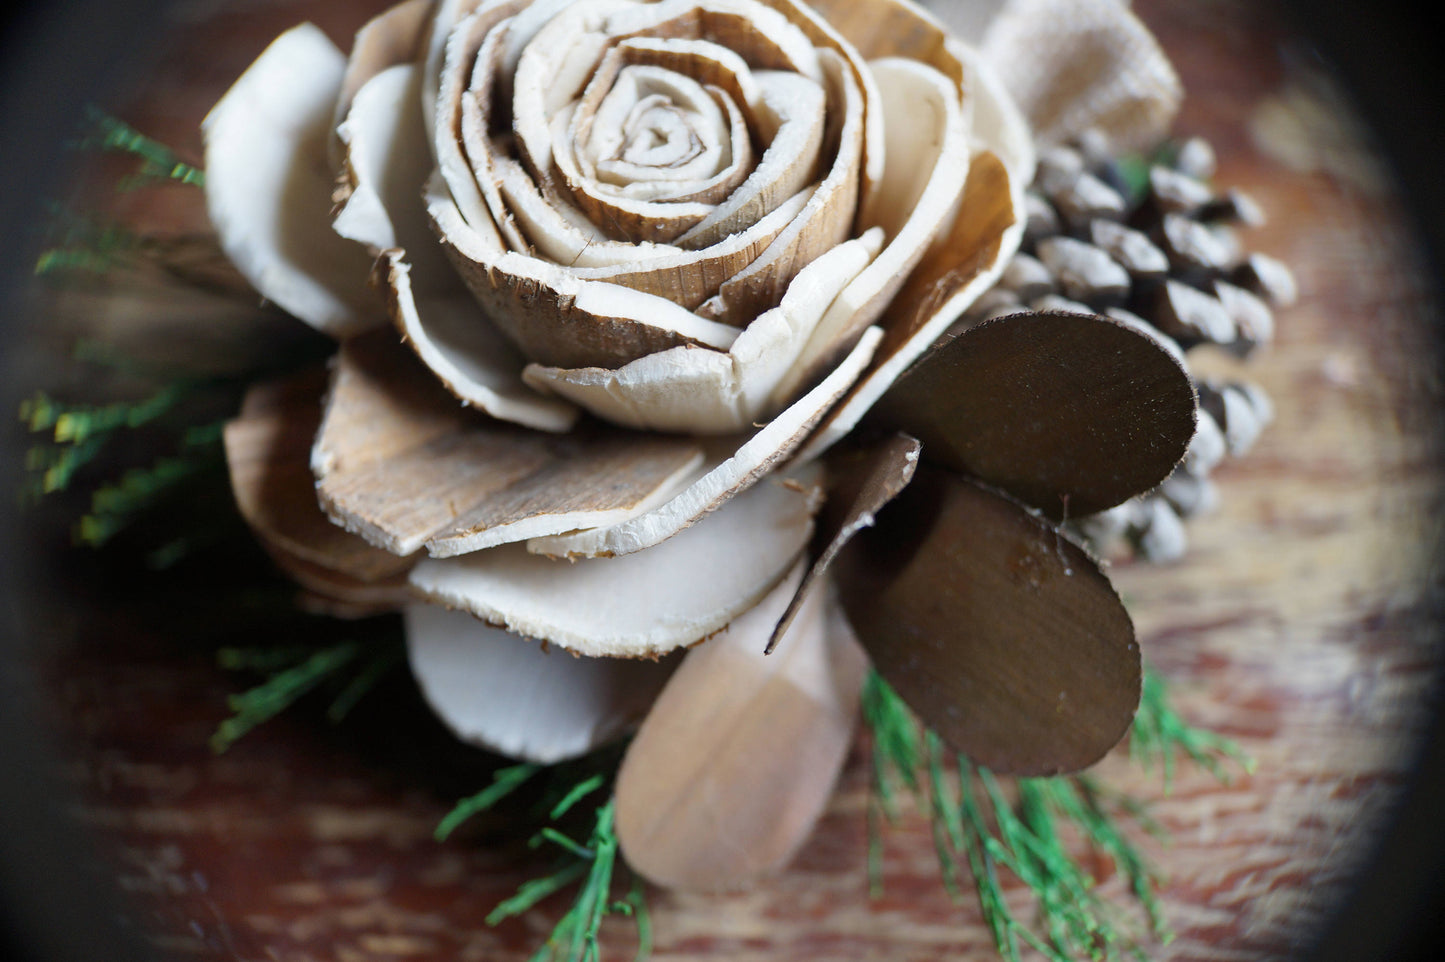 Enchanted Forest Sola Flower Corsage